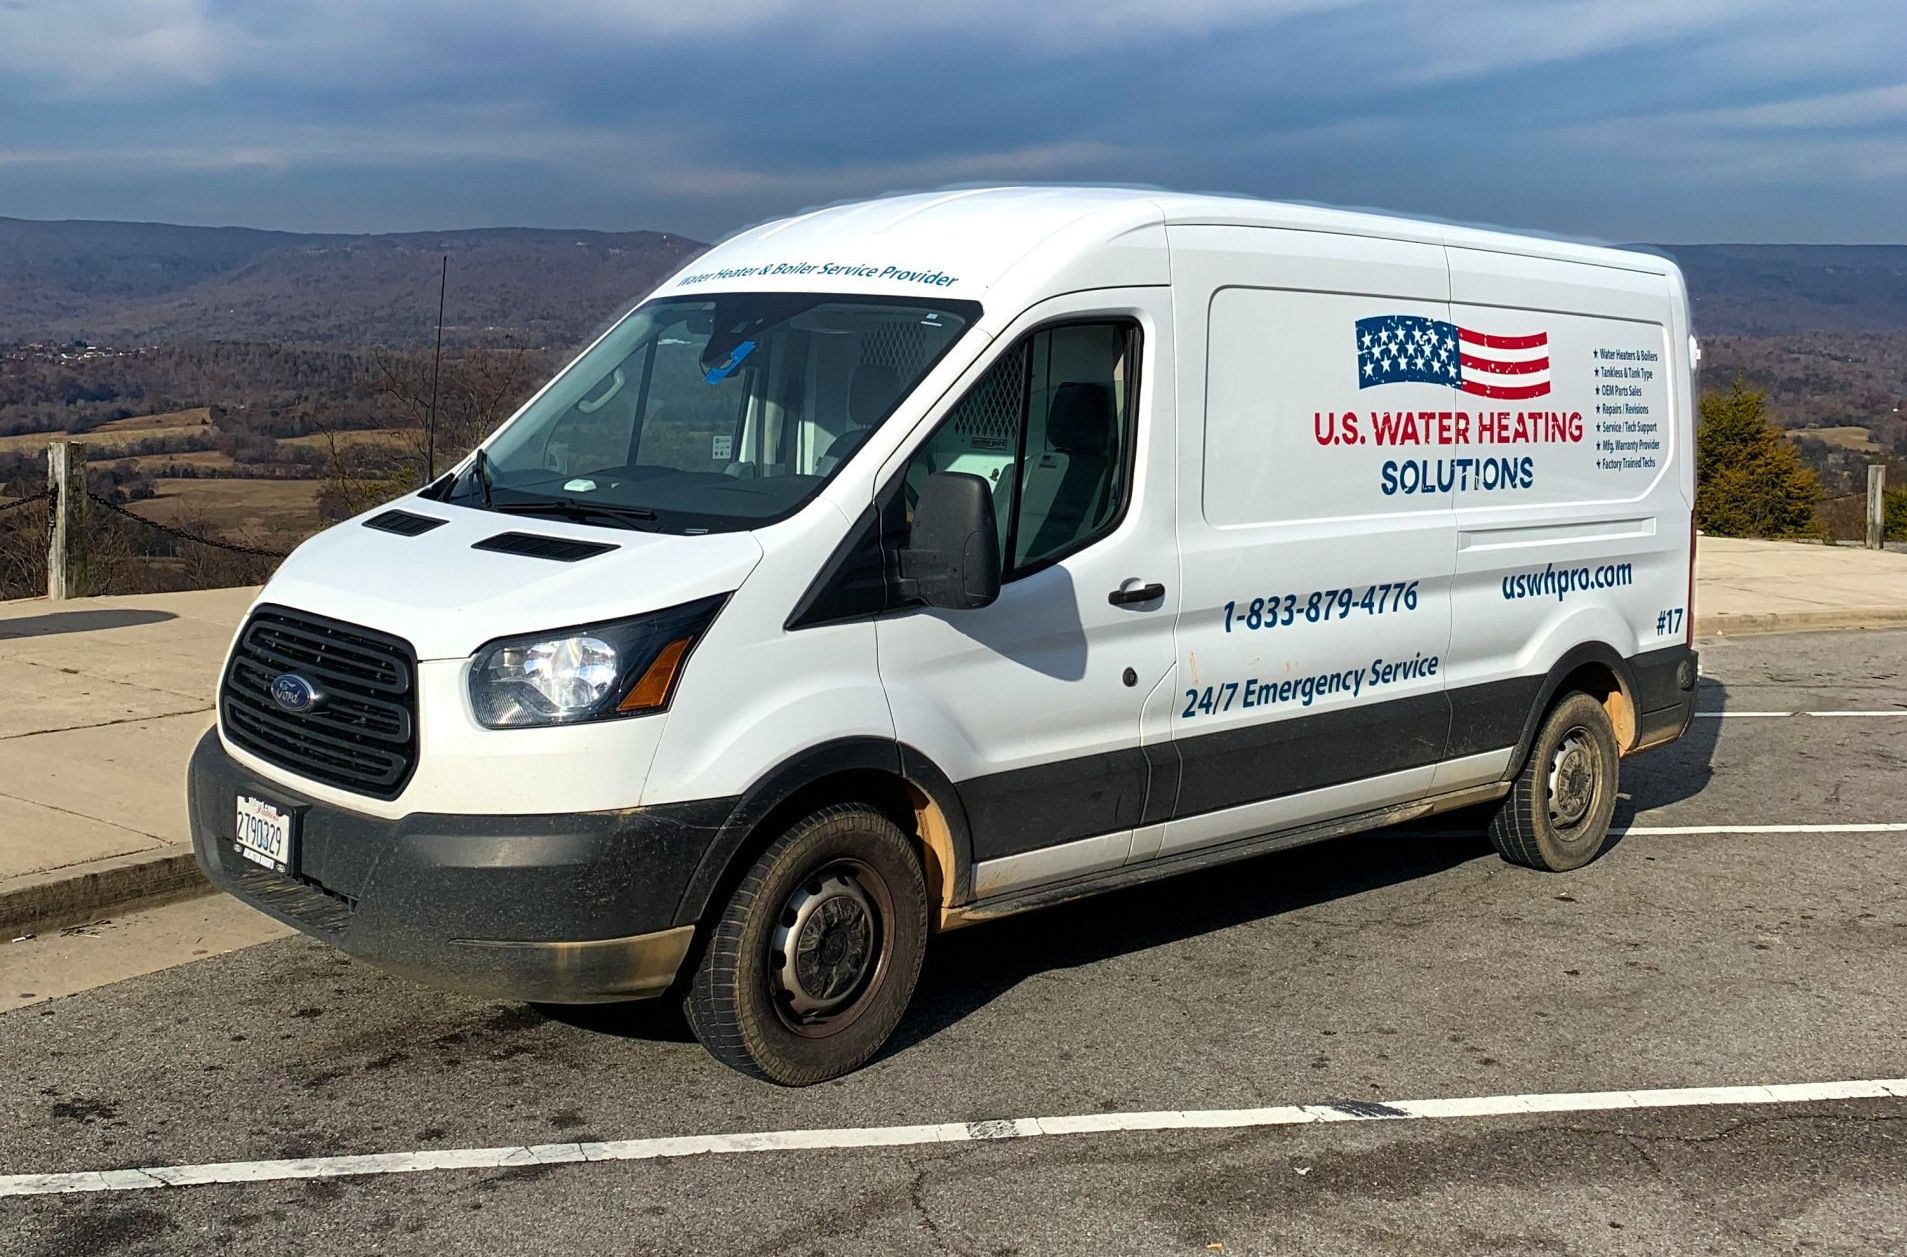 U.S. Water Heating Solutions Service Vehicle in Tennessee